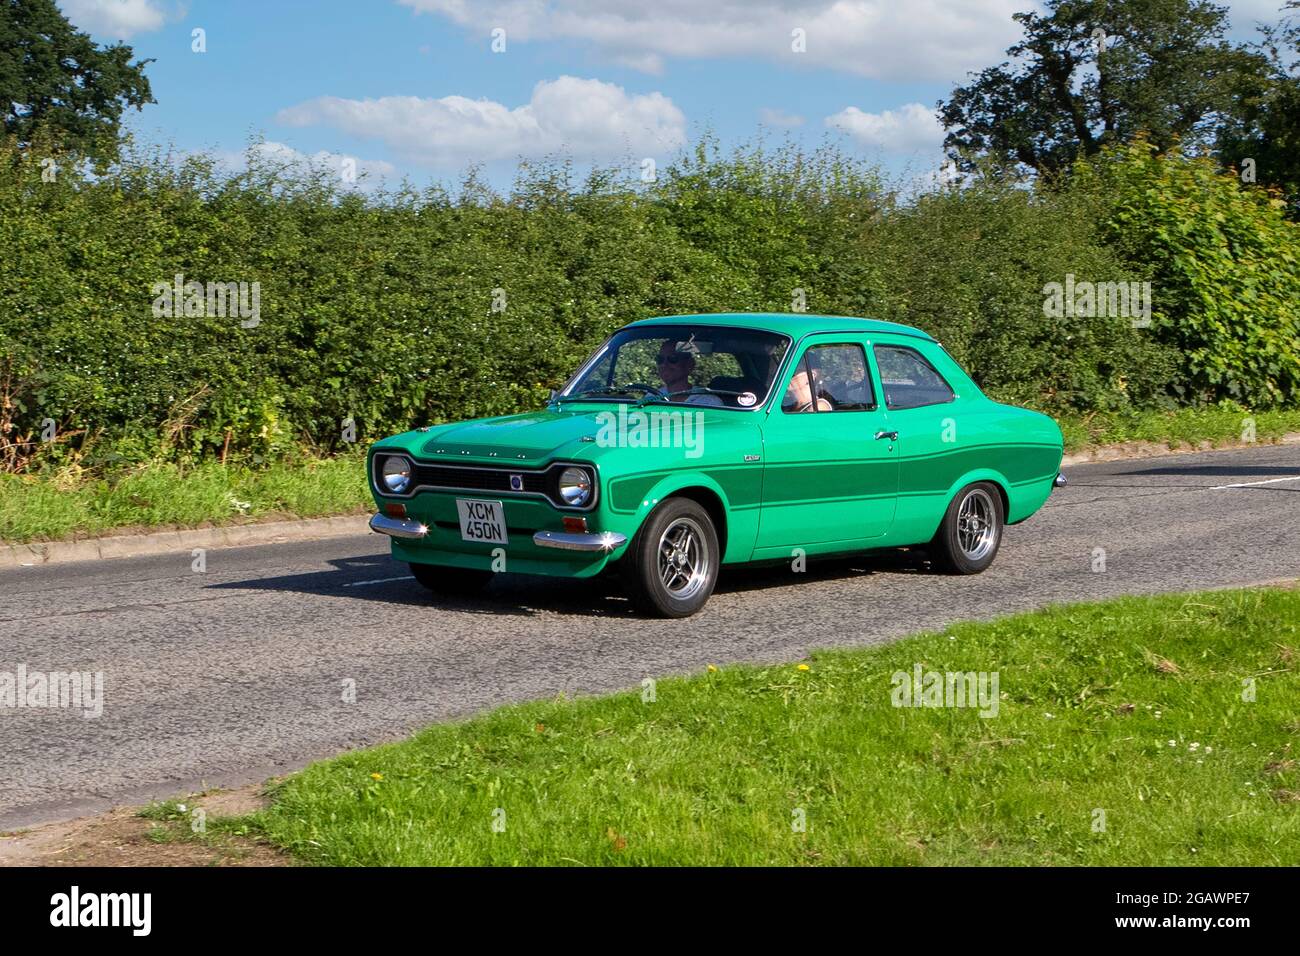 1974s, 70s, 1970s green Ford Escort classic vintage car arriving at the Capesthorne Hall classic car show. Stock Photo